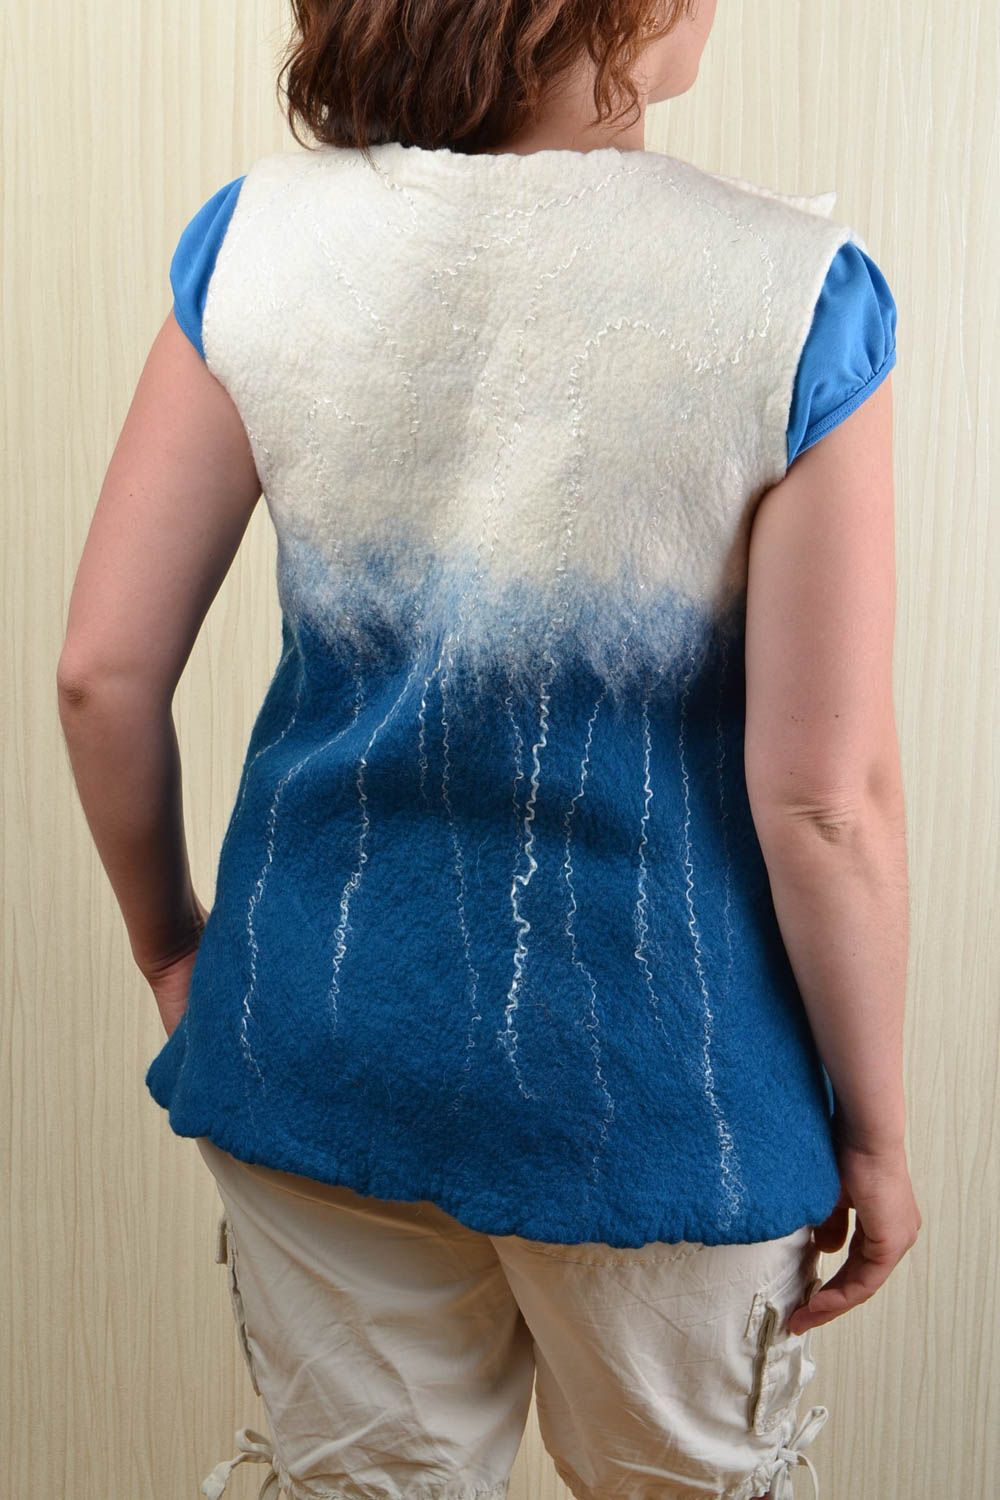 Women's vest wool felting technique made of natural material blue with white photo 5